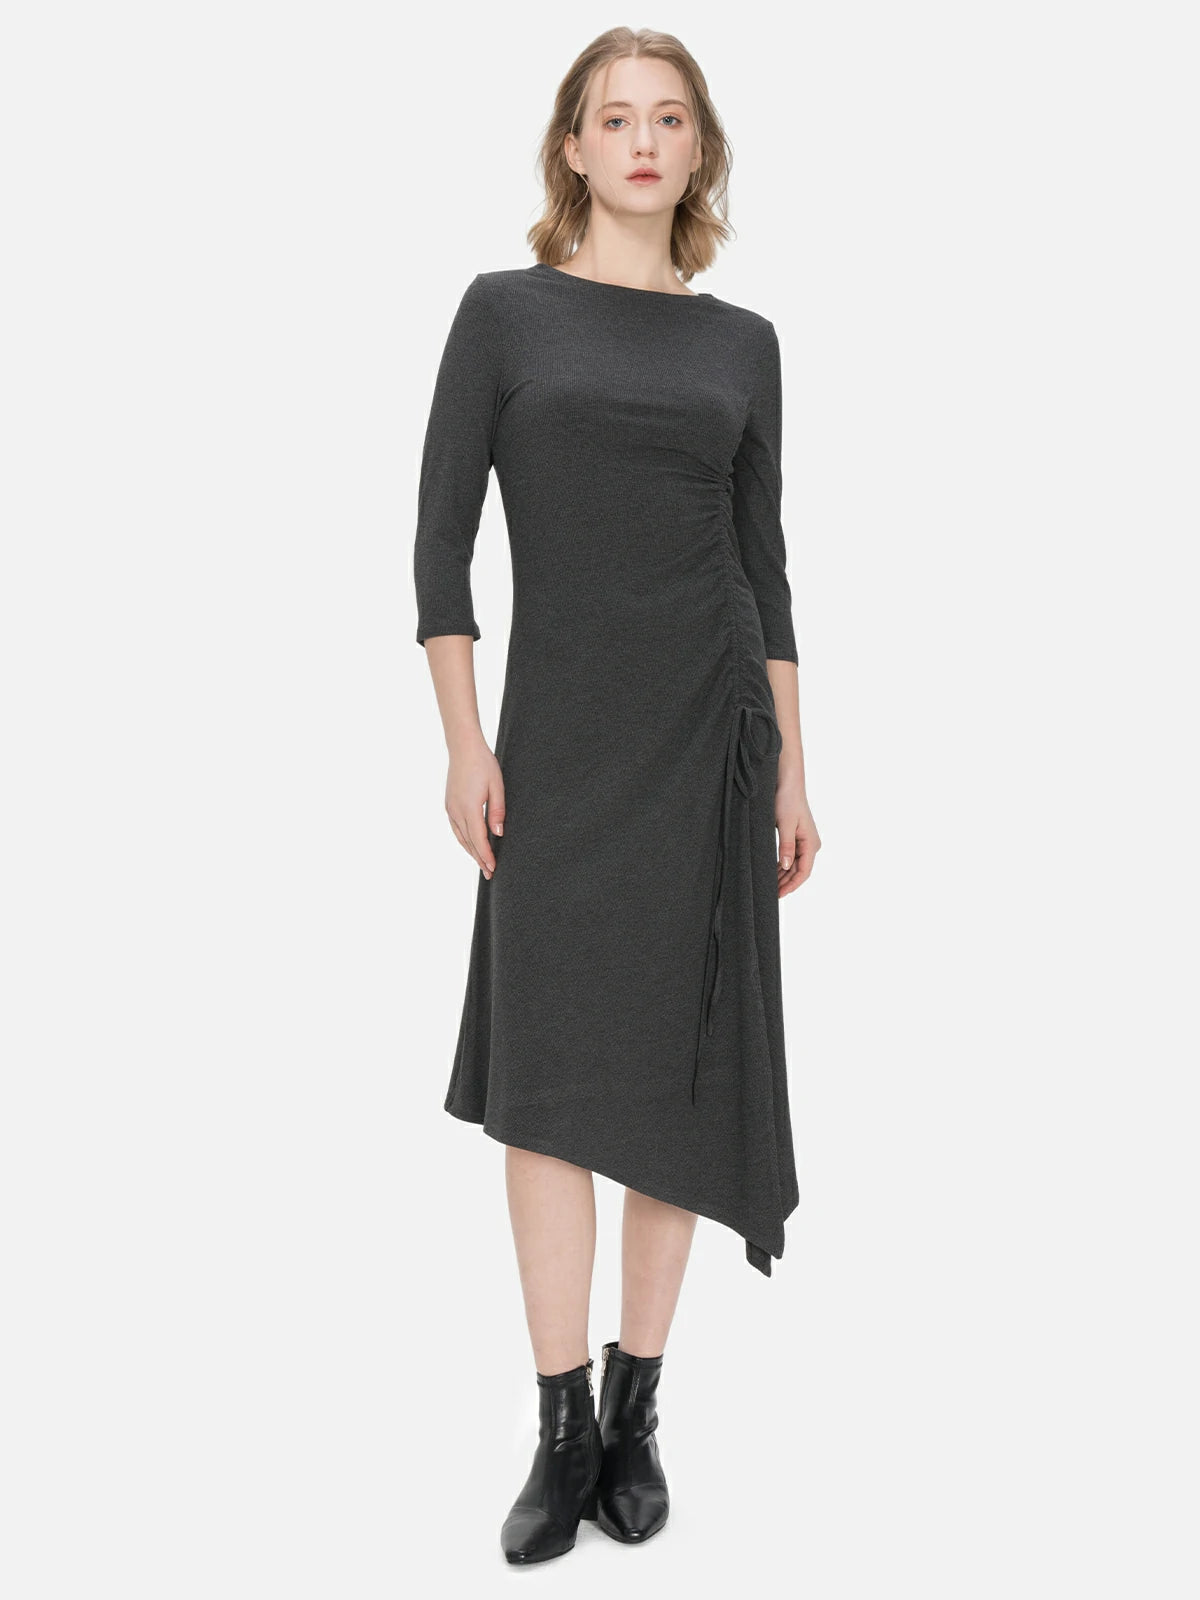 Stylish black knitted dress with an irregular hem, side slit, and drawstring design, offering a comfortable and fashionable silhouette suitable.